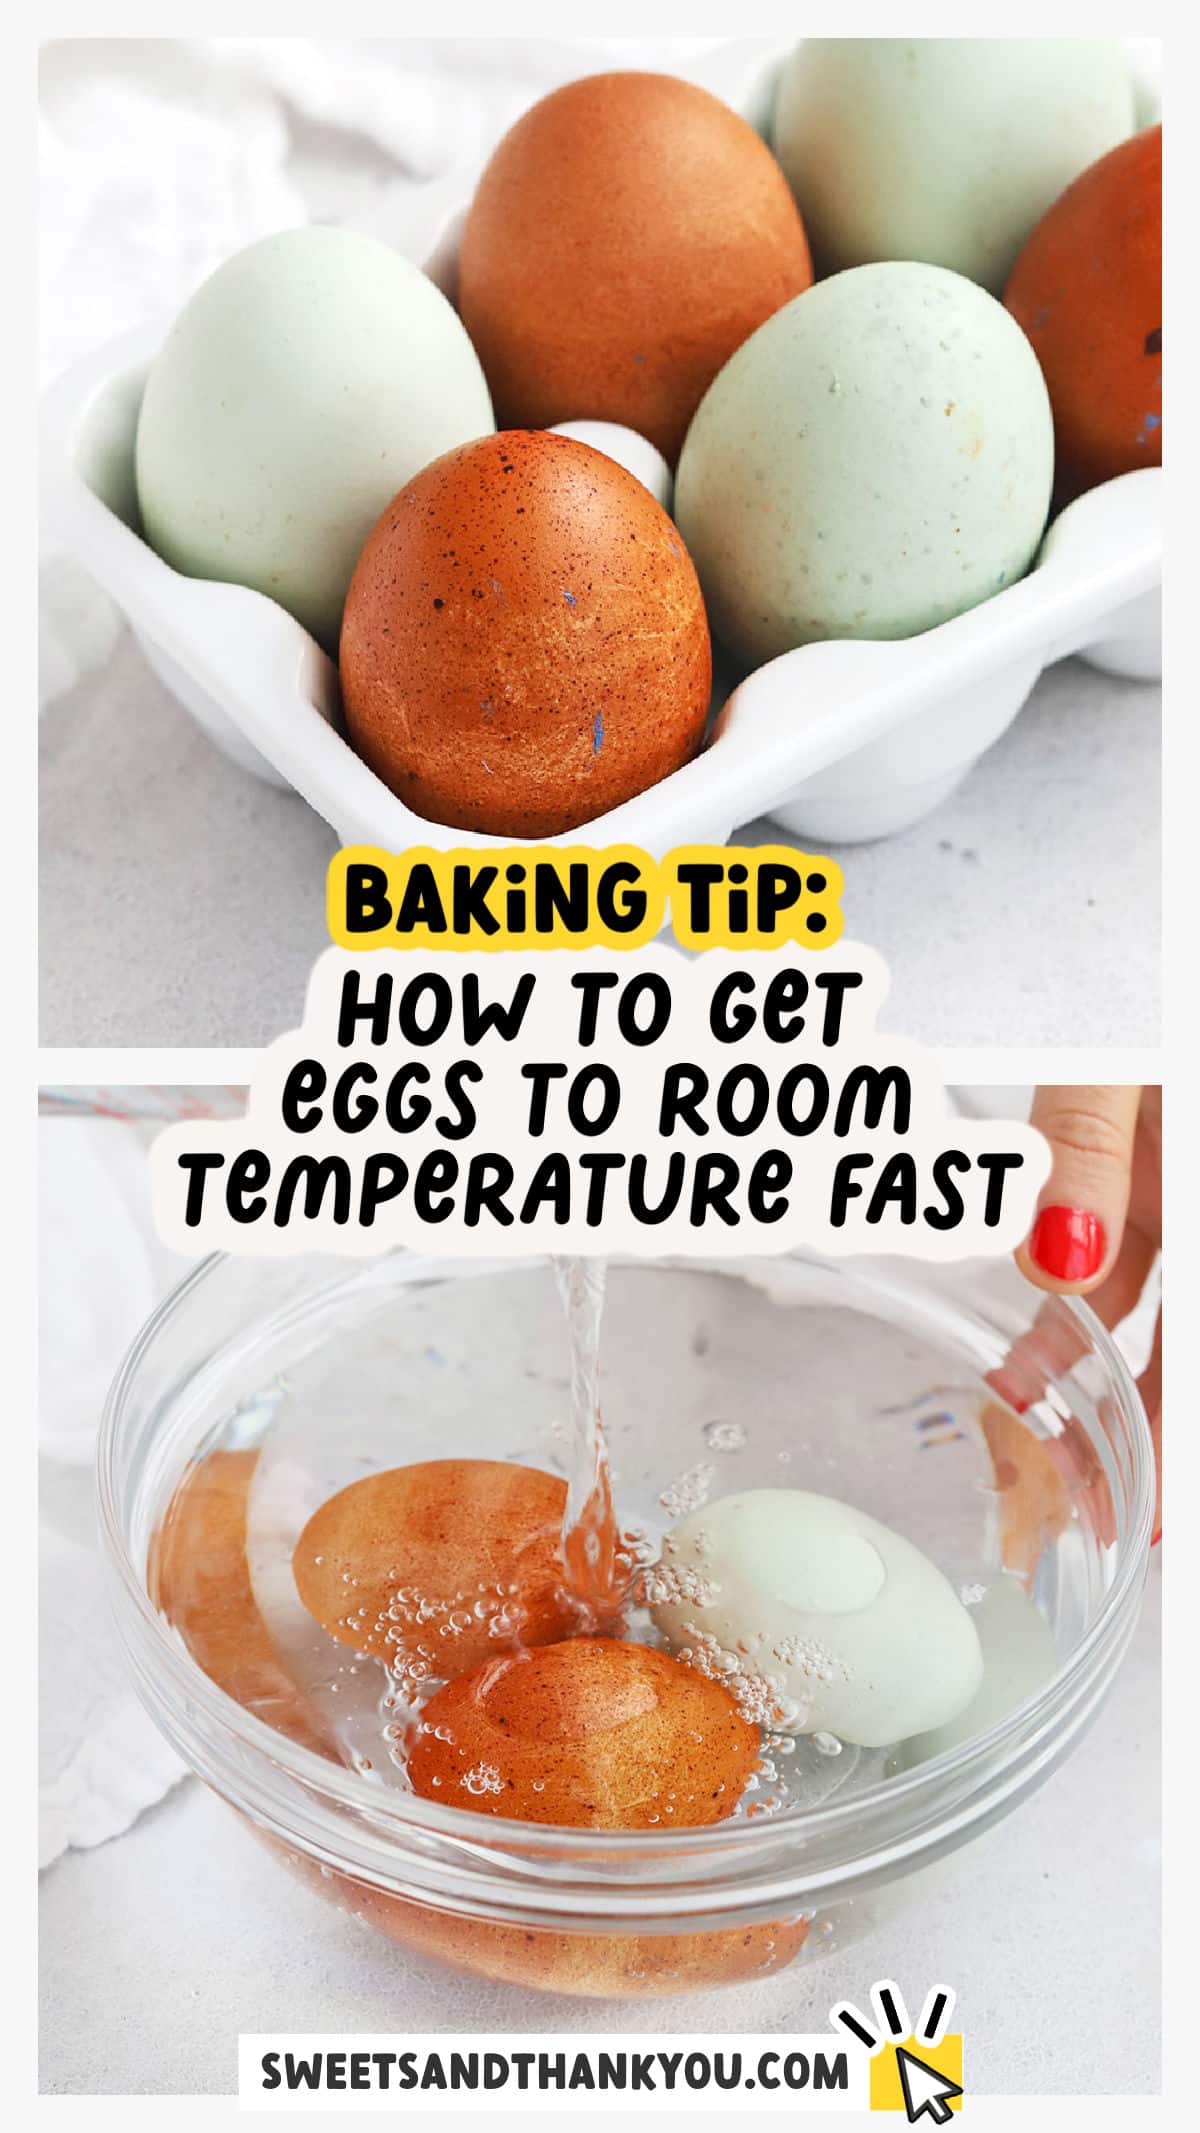 How To Get Eggs To Room Temperature Quickly - Learn the best trick for getting eggs to room temperature quickly & why room temperature eggs are important! From how long does it take eggs to get to room temperature to an easy water trick for bringing eggs to room temperature, we've got everything you need to know!